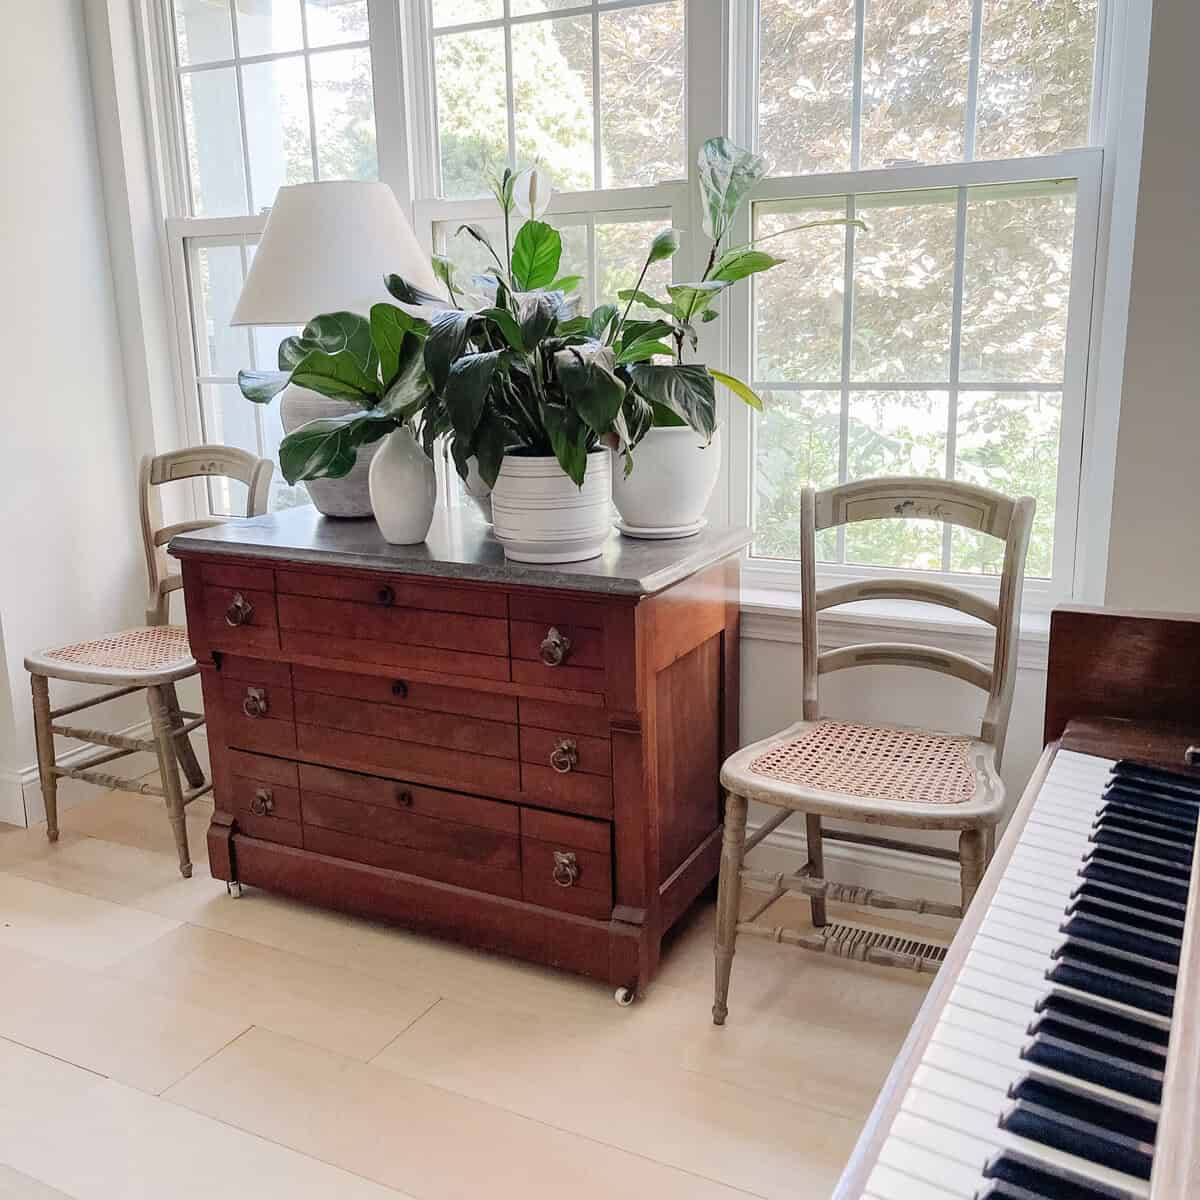 Plywood flooring in music room with large window